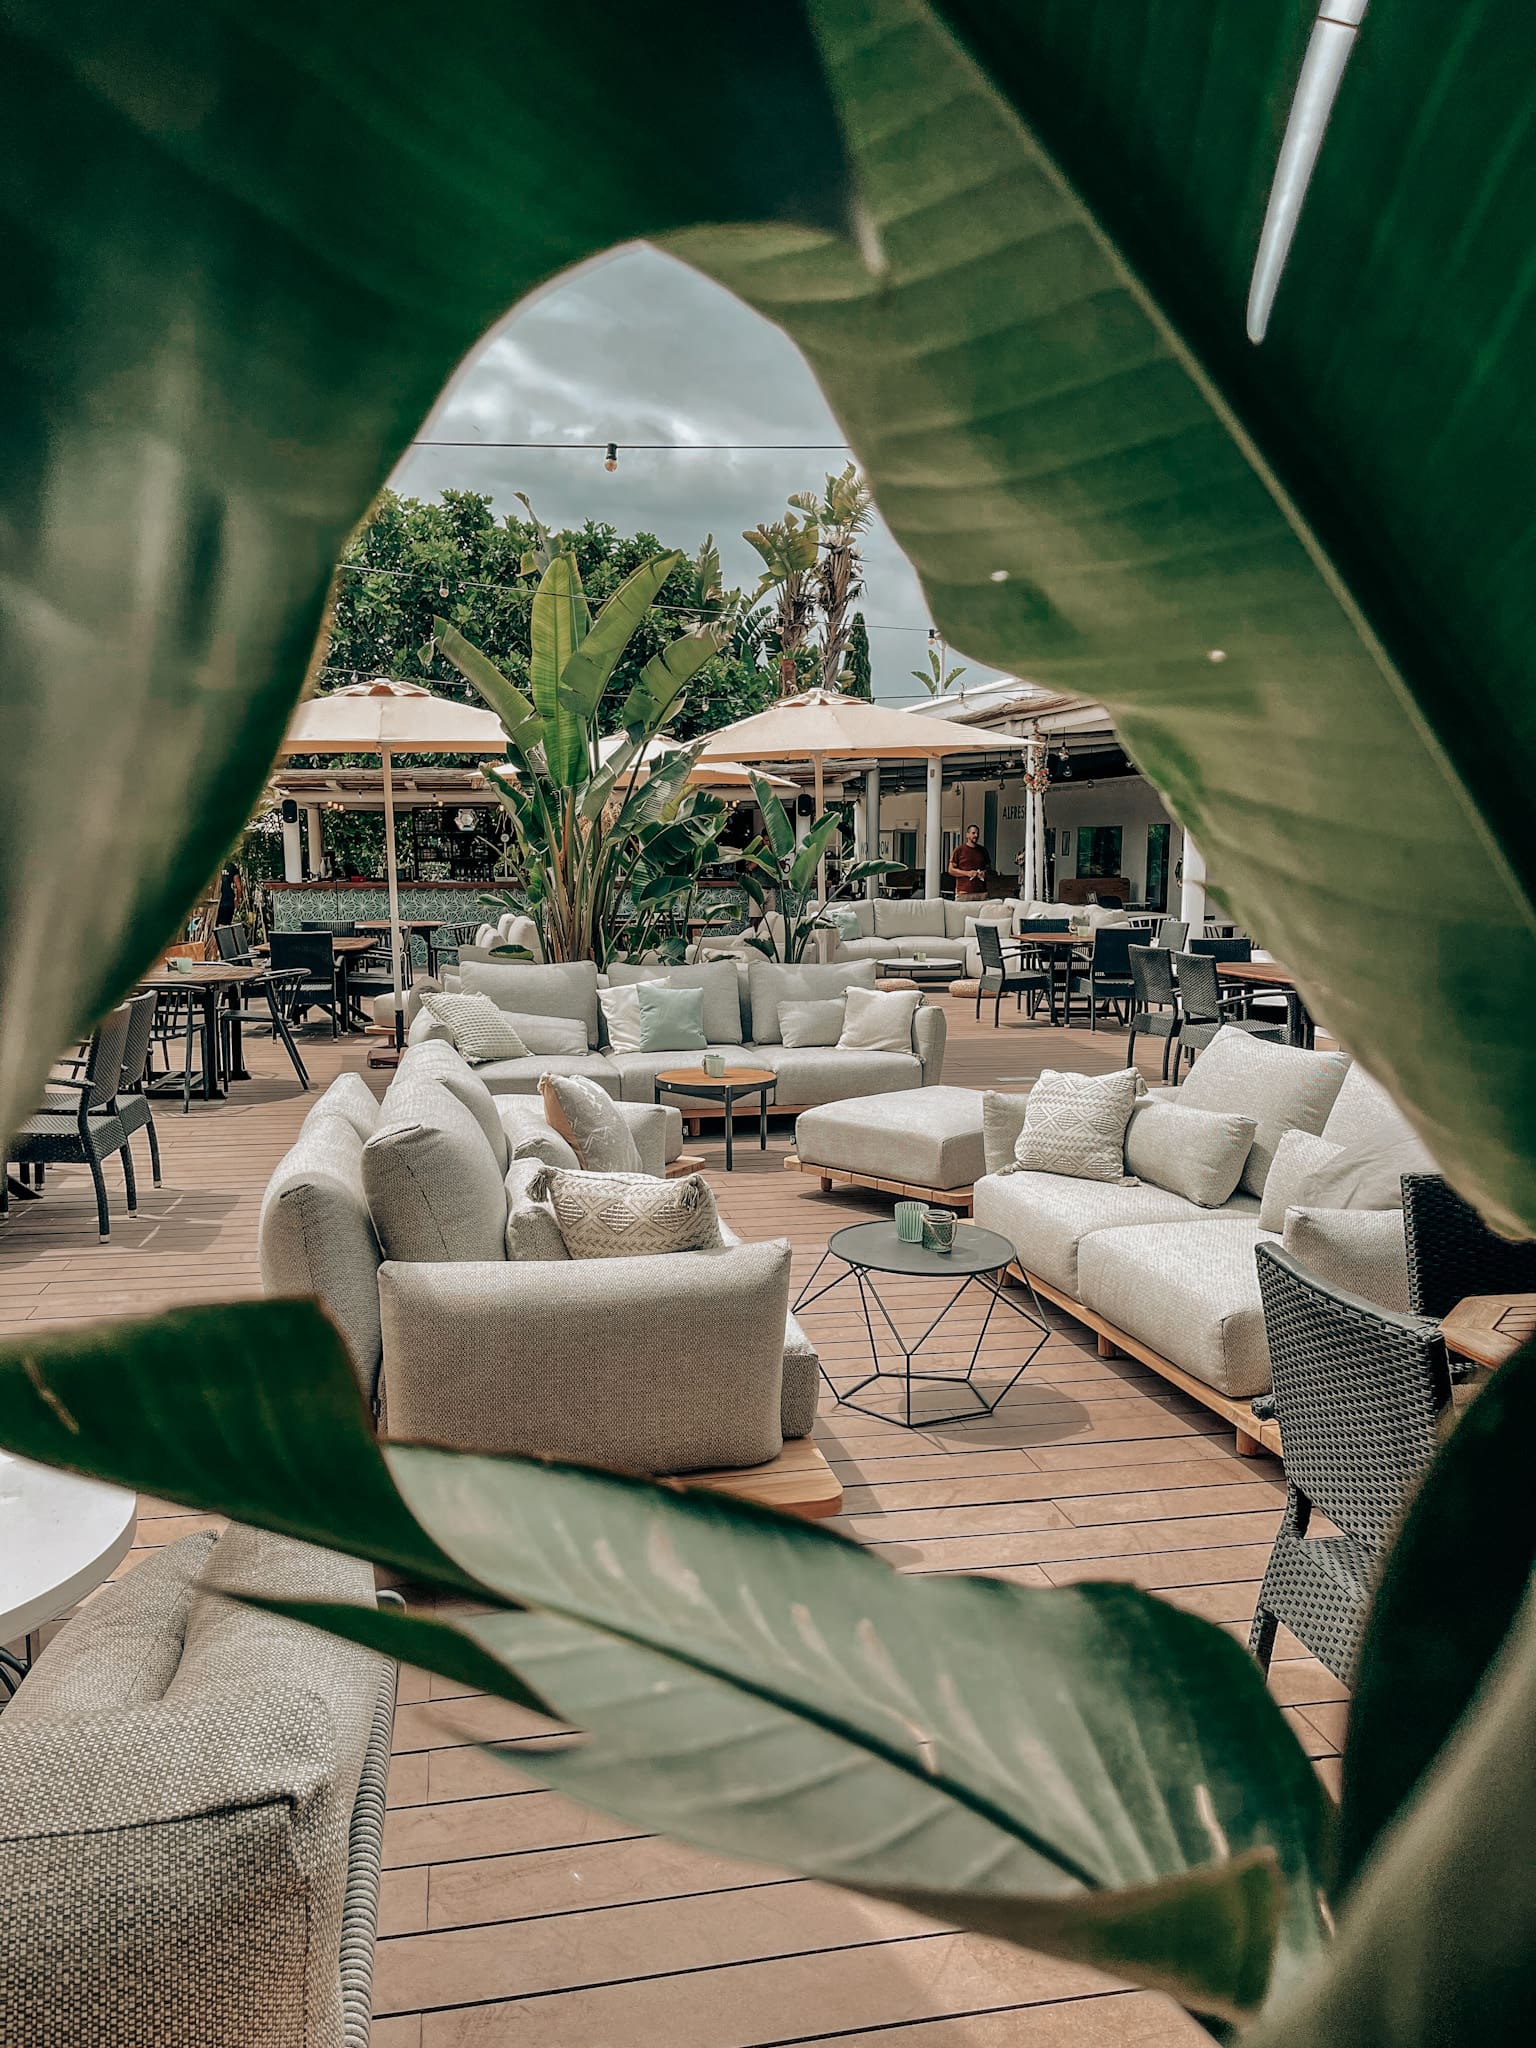 The rise of the Slomad | Tropical leaves reveal TheHUB, a co-working space in Ibiza